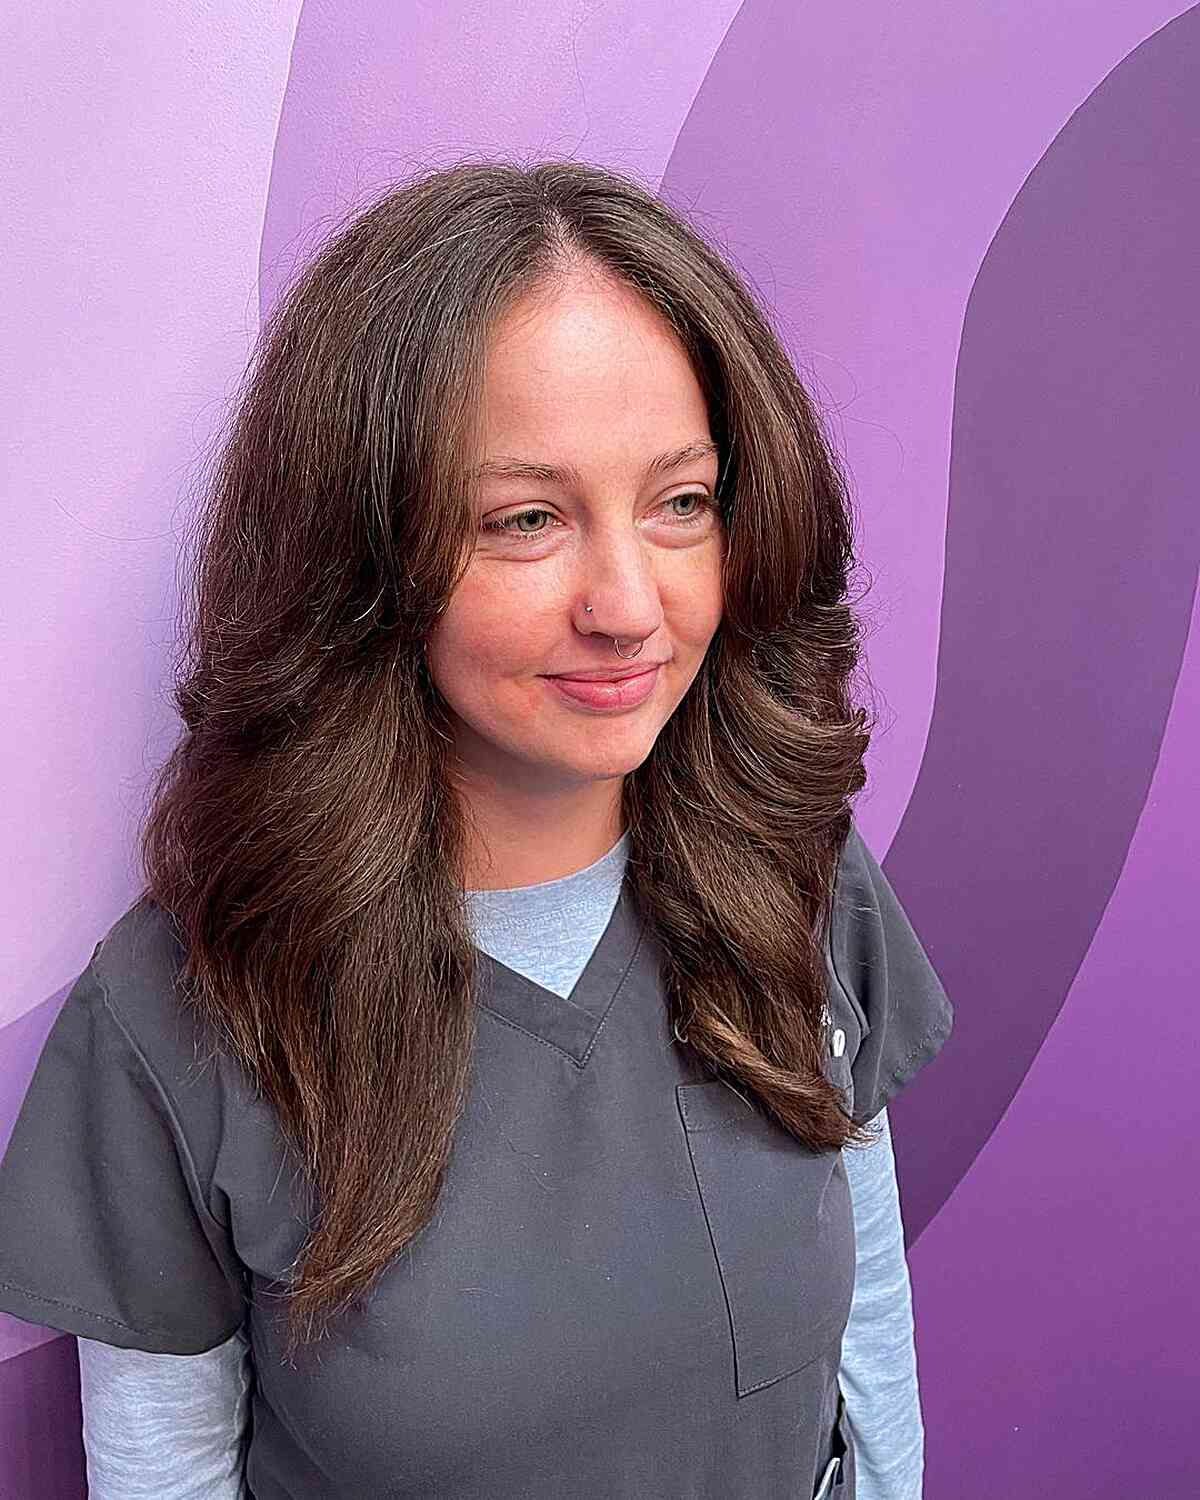 Blow-Out Shag on Thick Medium-Length Brunette Hair for Women with Long Faces